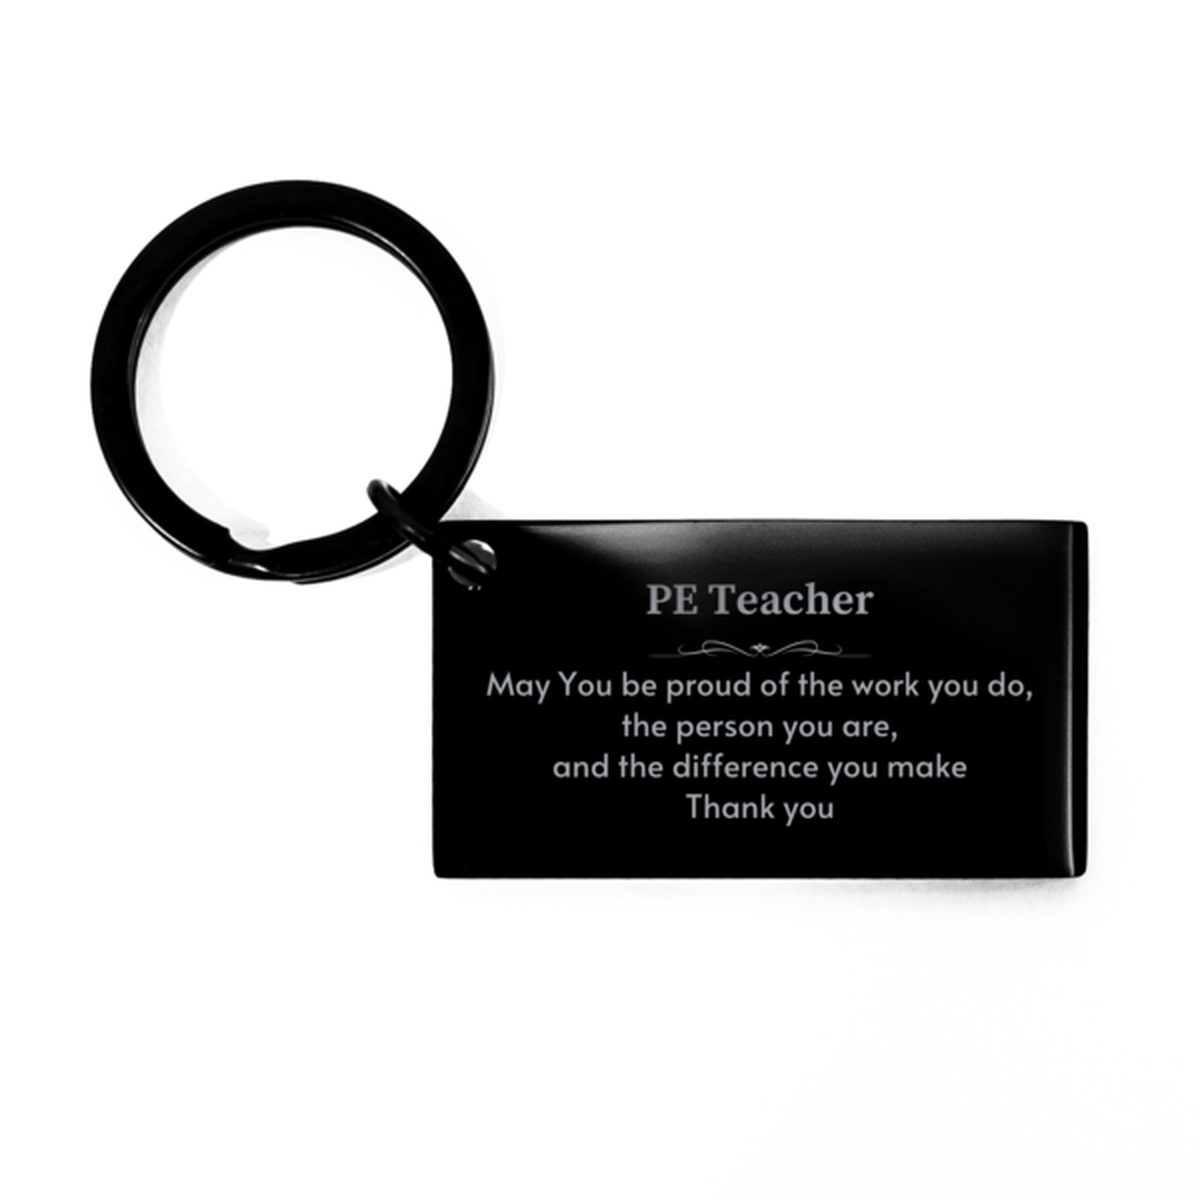 Heartwarming Keychain Retirement Coworkers Gifts for PE Teacher, Rancher May You be proud of the work you do, the person you are Gifts for Boss Men Women Friends